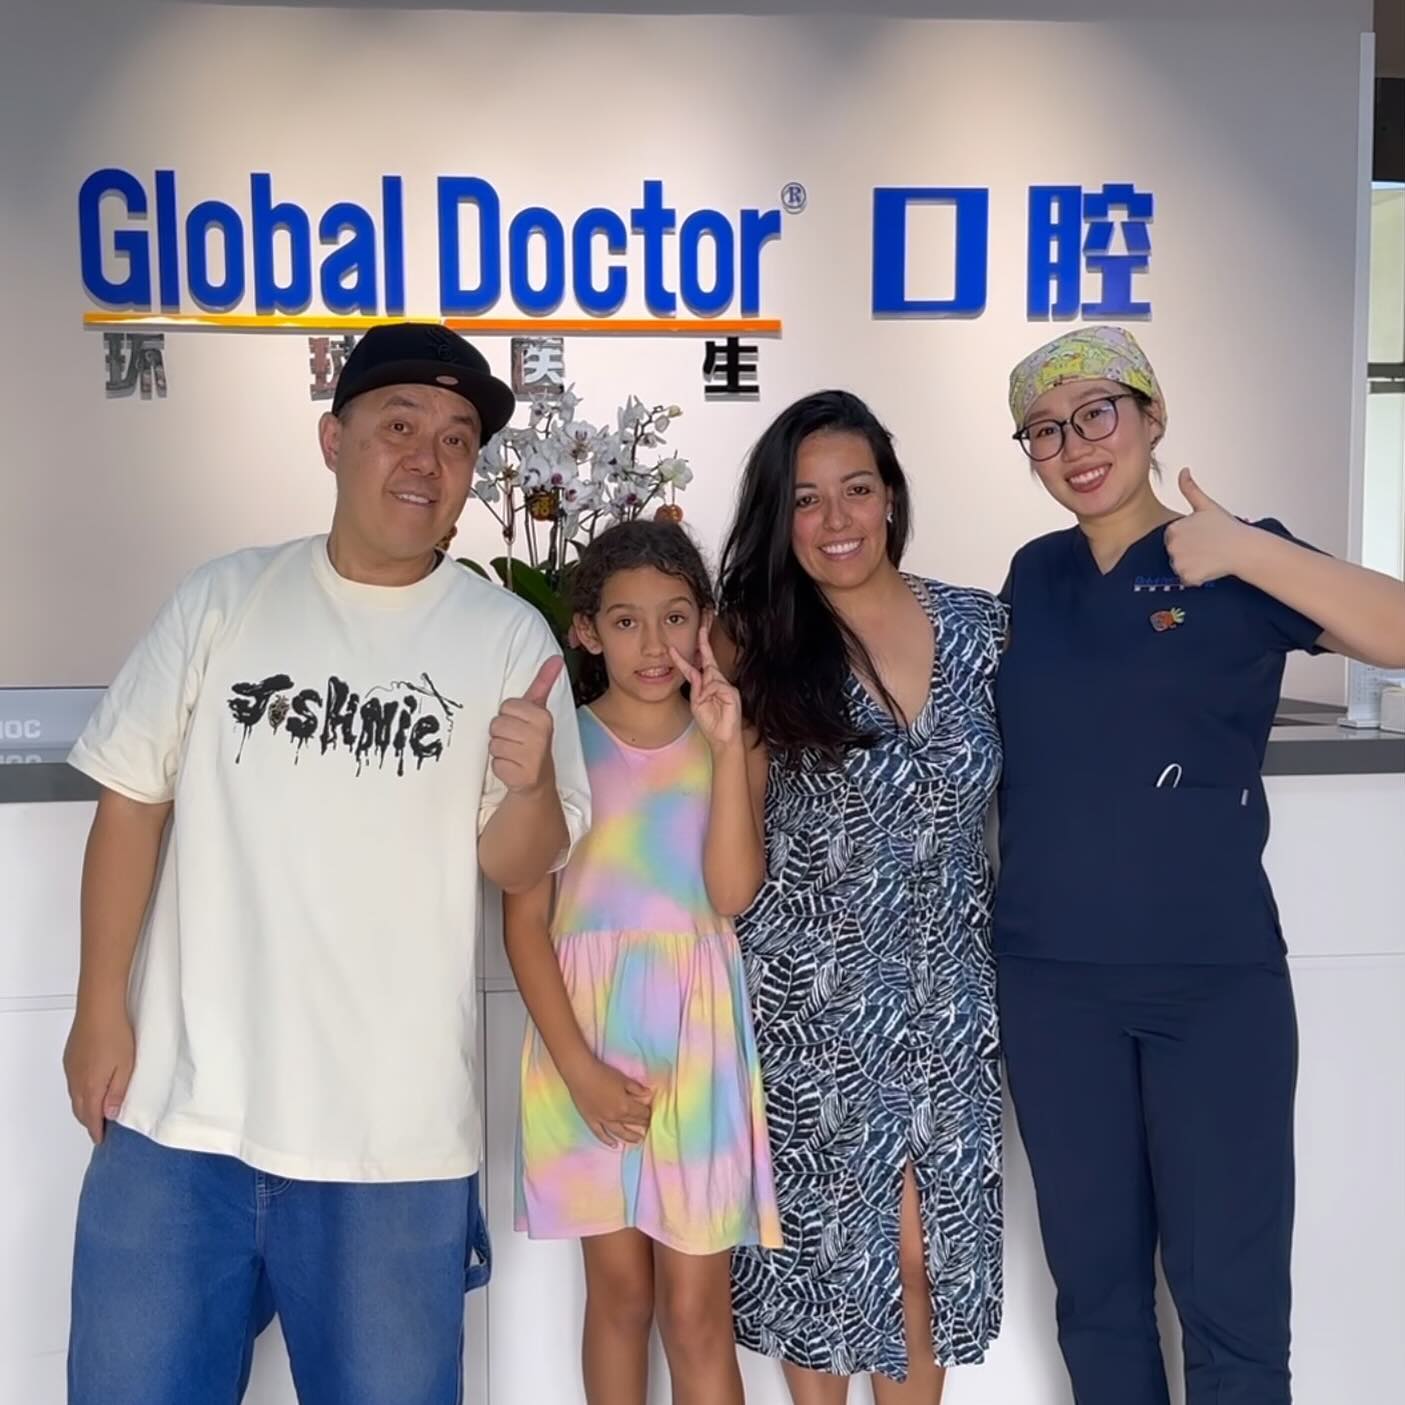 Sonia from Martin’s Football visiting #GlobalDoctorDental for the dental check. Look forward to having more children have their teeth checked.